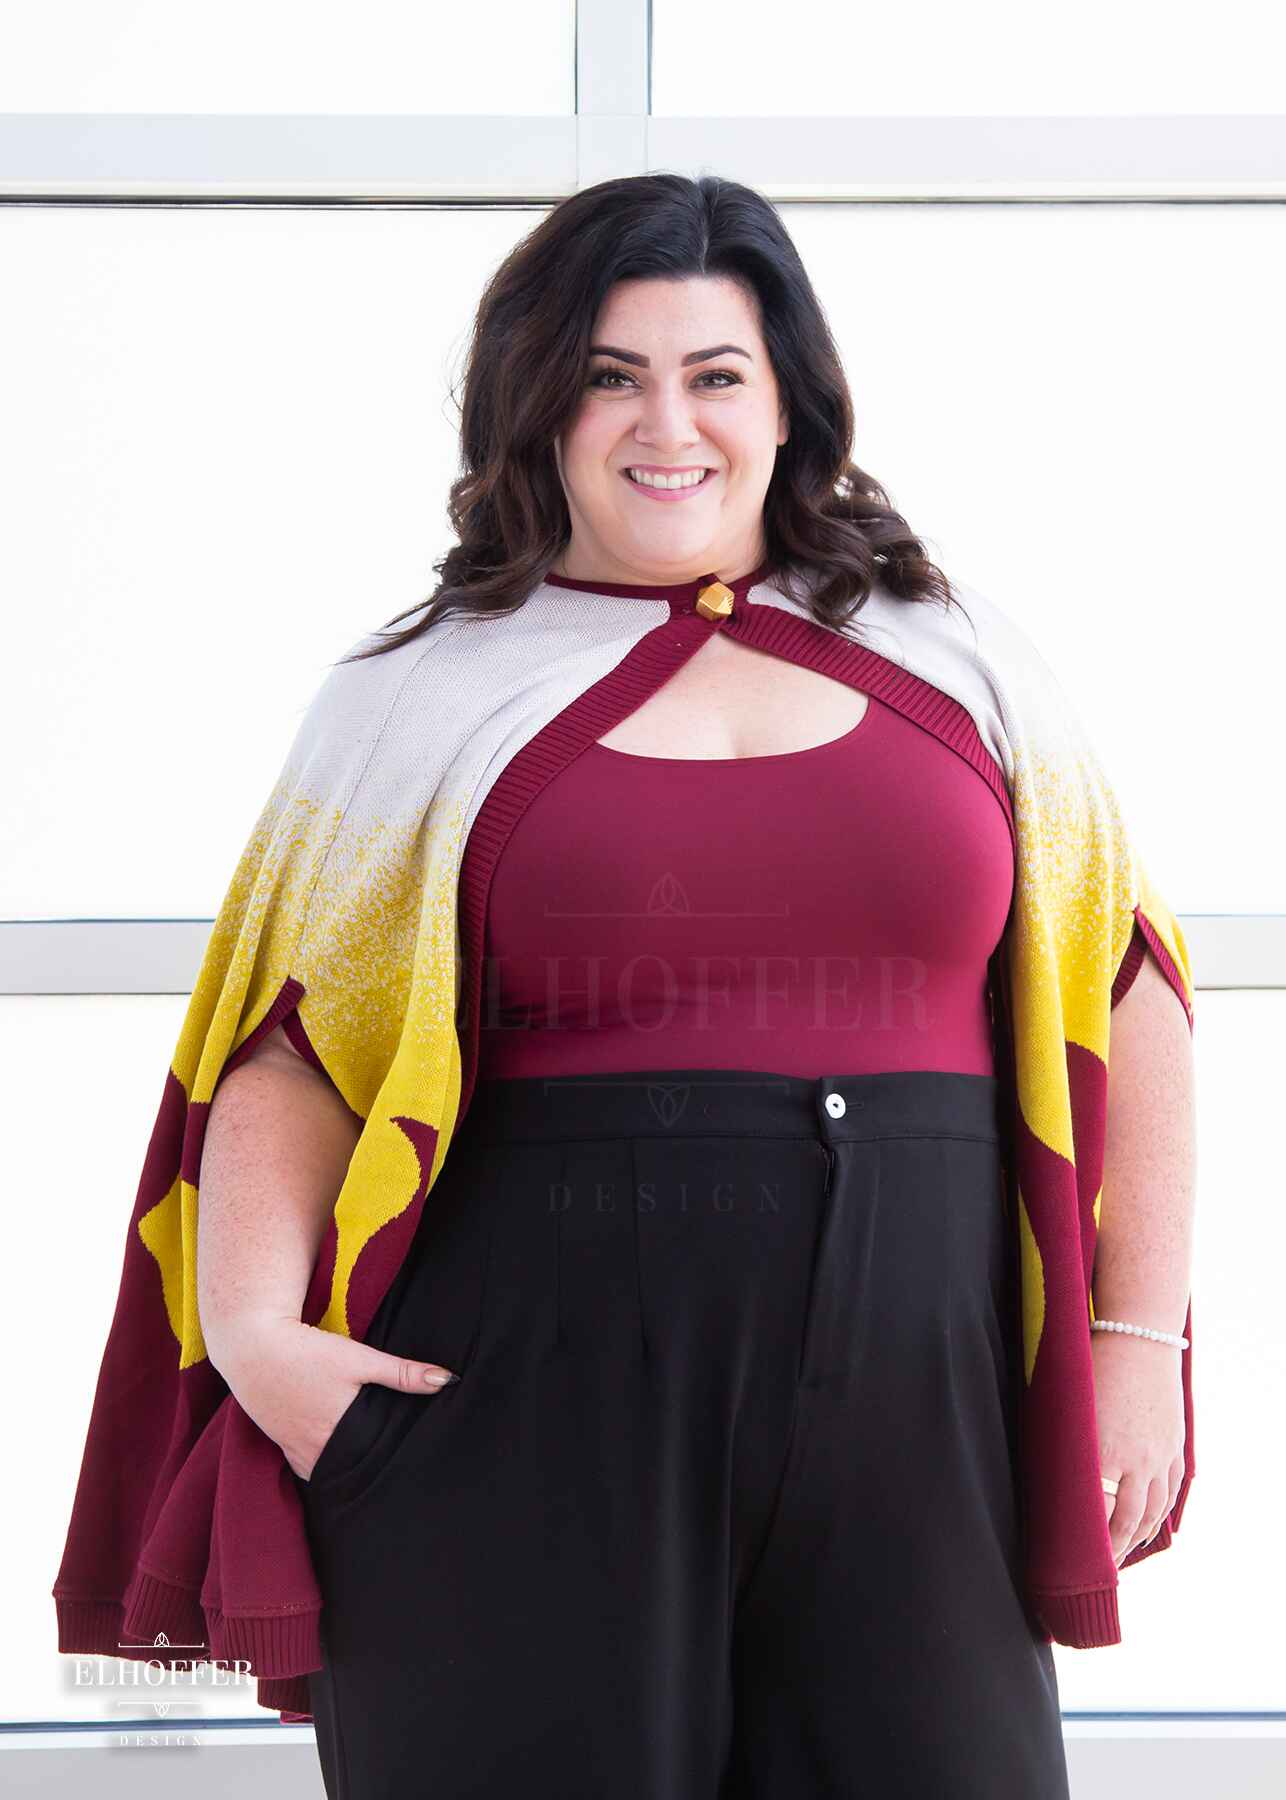 Stacy, a light skinned XL model with shoulder length wavy dark brown hair, is wearing a below hip length knit cape. The cape is a gradient of color from white at the shoulders, to yellow, to a red fire design at the bottom, it also has a button closer at the neck, and armholes in the side seam. She paired the cape with a burgundy scoop neck crop top and black pleated trousers.